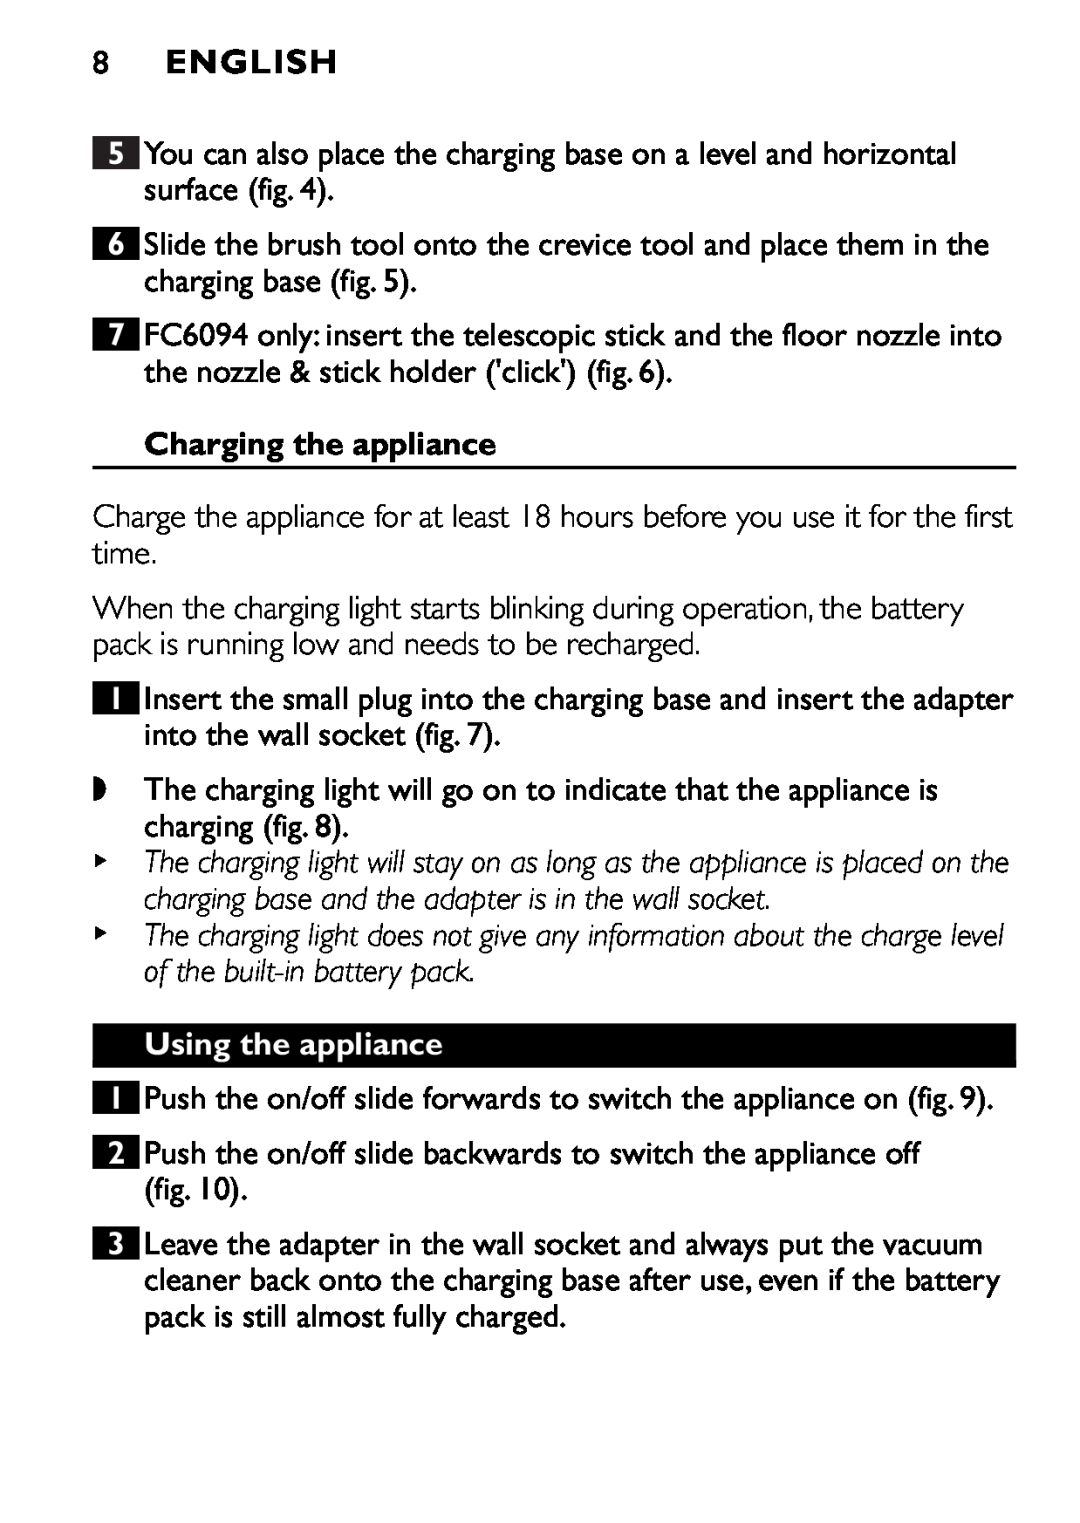 Philips FC6094, FC6092, FC6090 manual 8ENGLISH, Charging the appliance, Using the appliance 